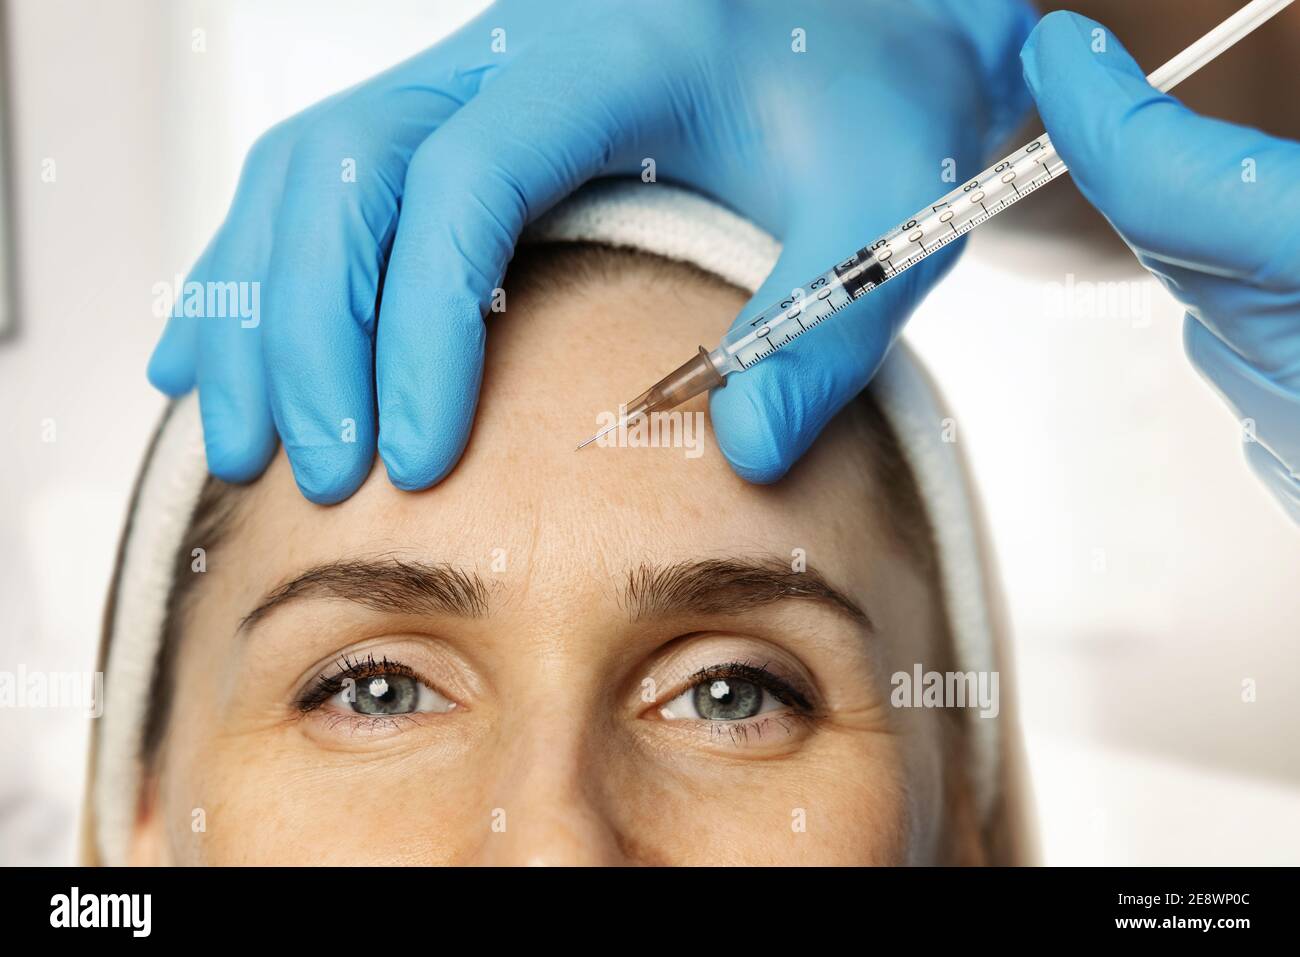 woman getting cosmetic injection in forehead to reduce wrinkles Stock Photo